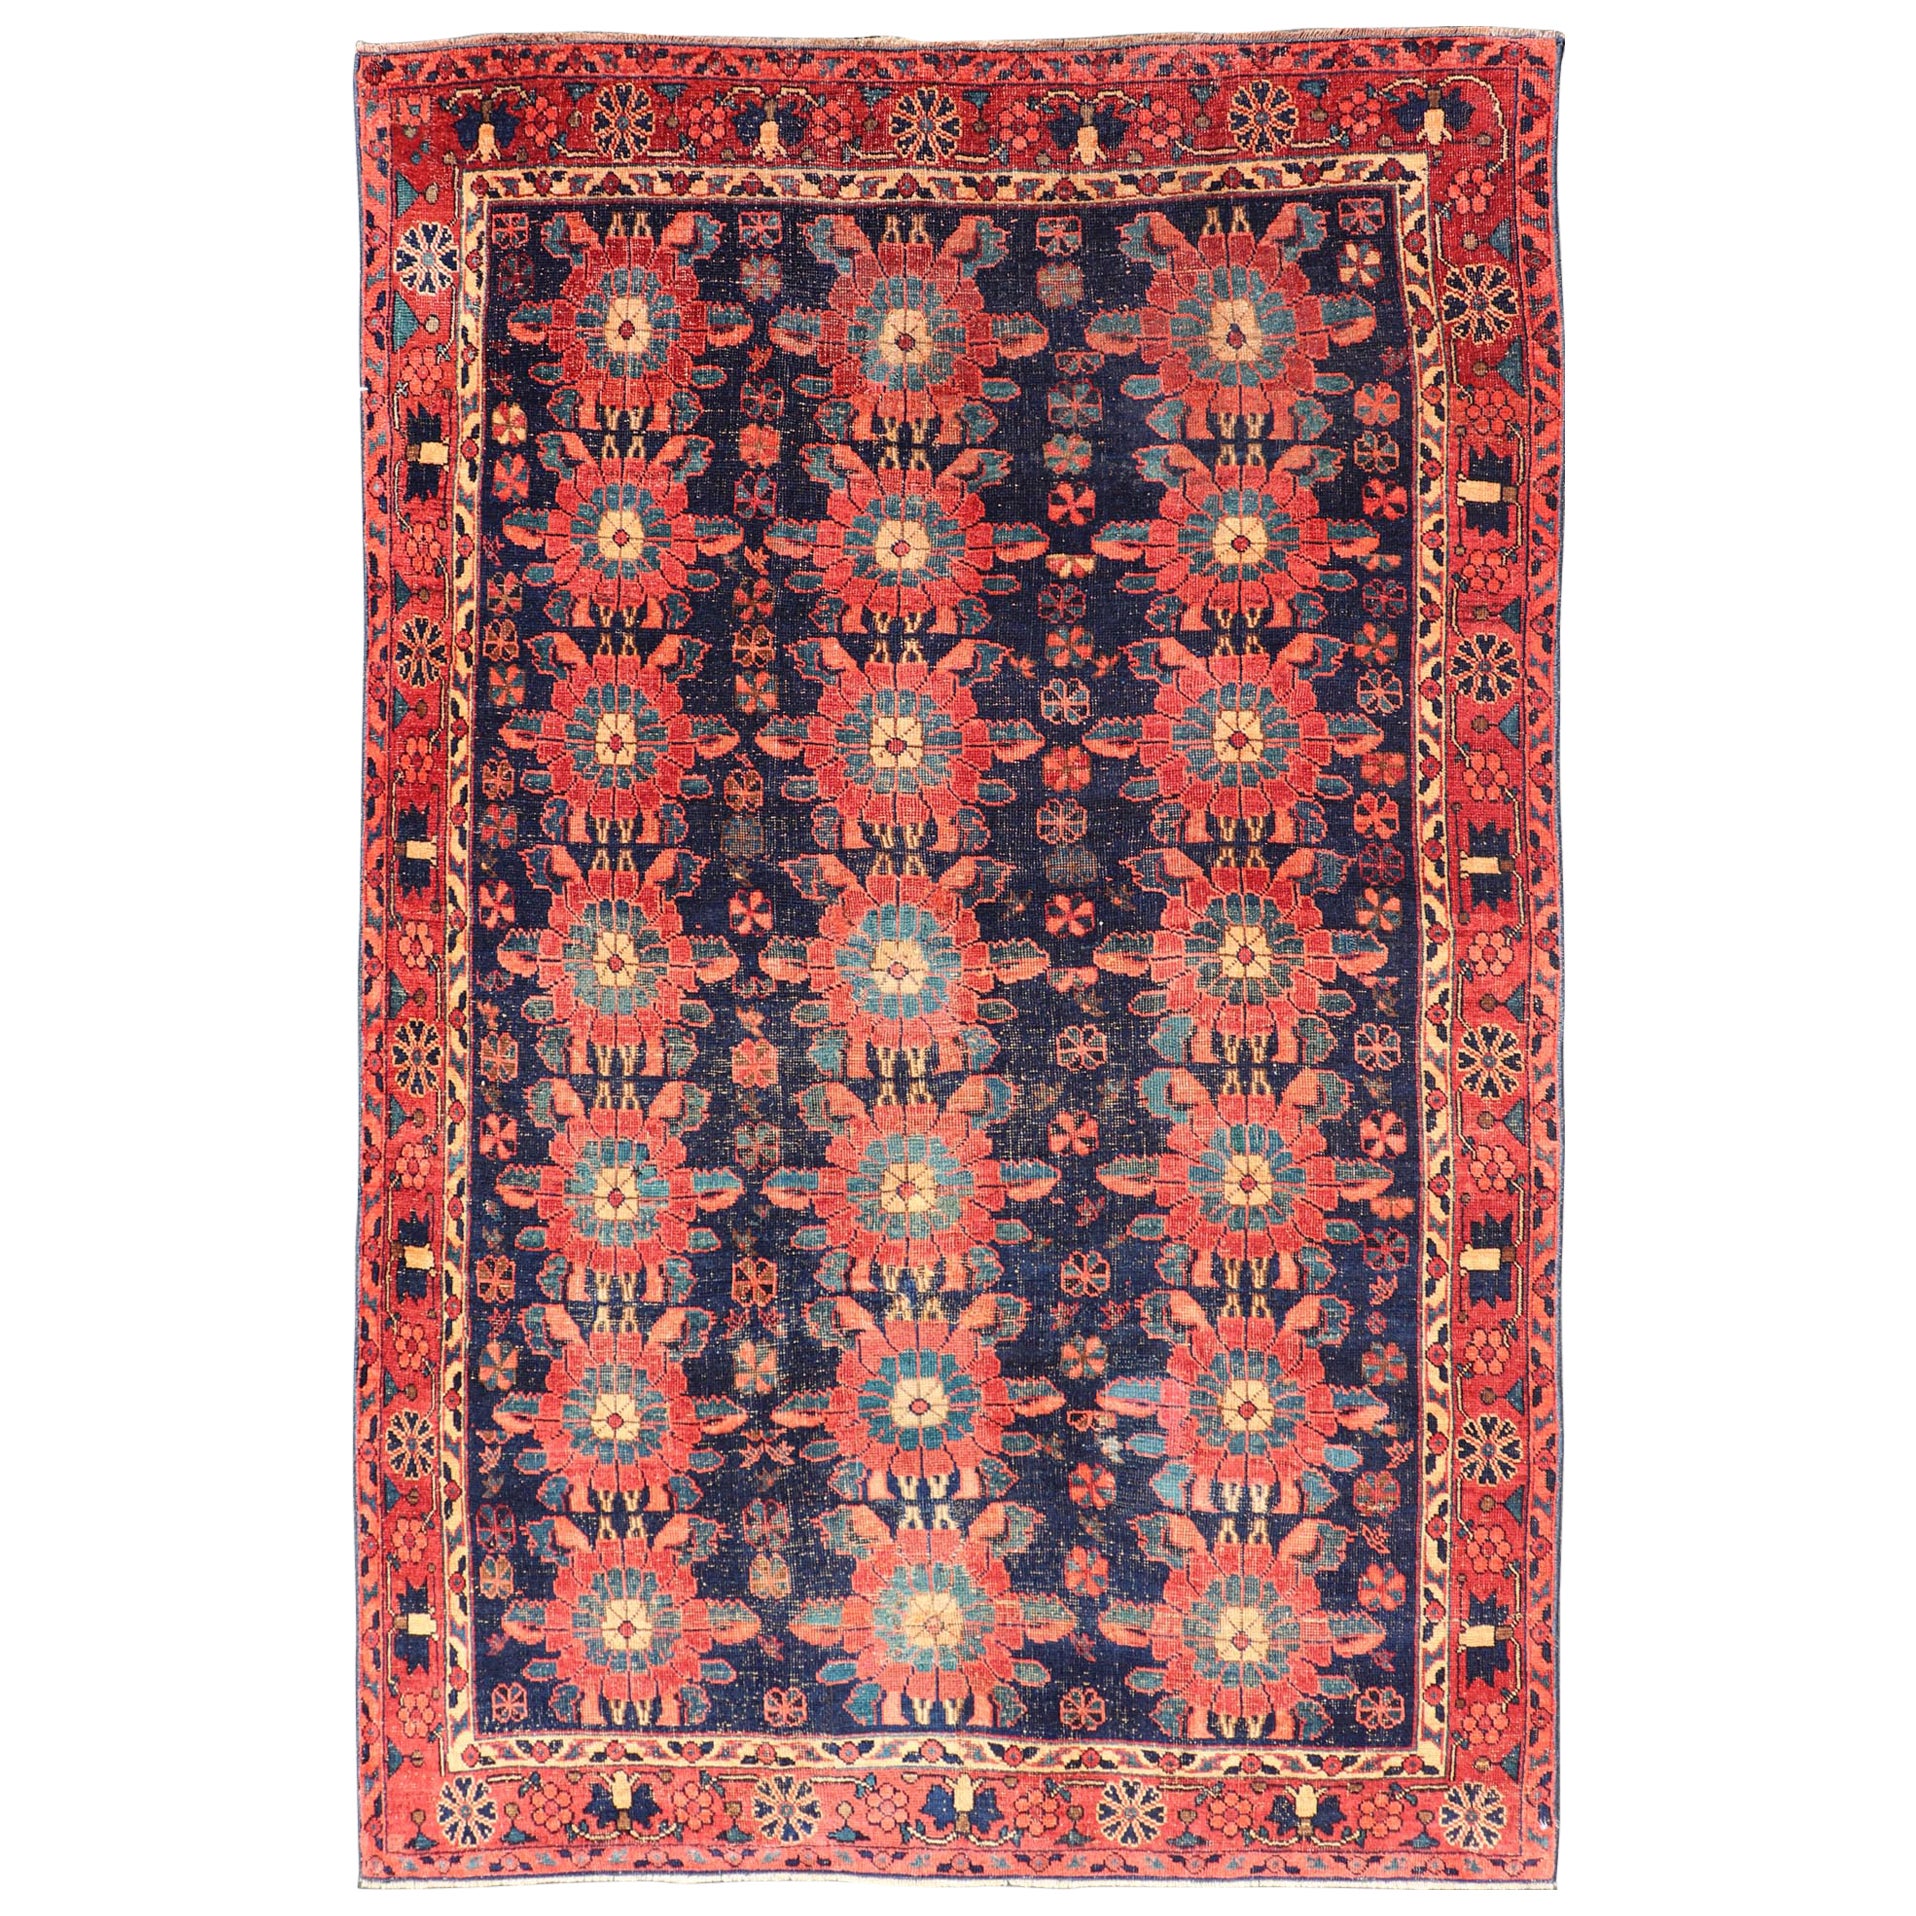 Antique Persian Bidjar Rug with All-Over Floral Motifs in Red and Blue For Sale